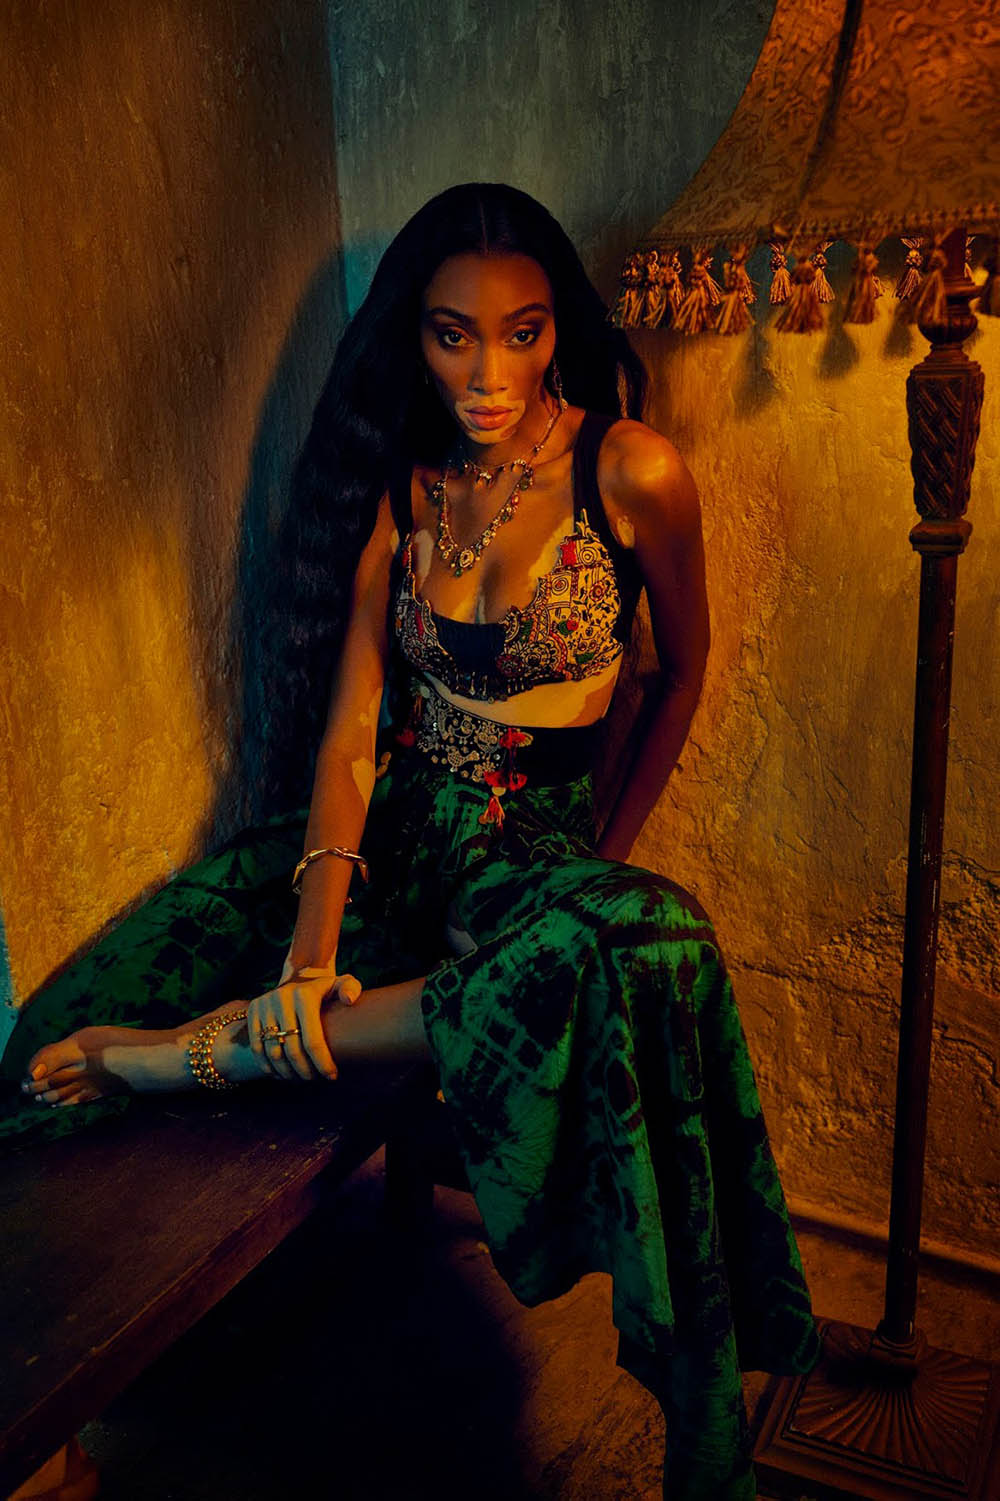 Winnie Harlow covers Vogue India March 2020 by Billy Kidd